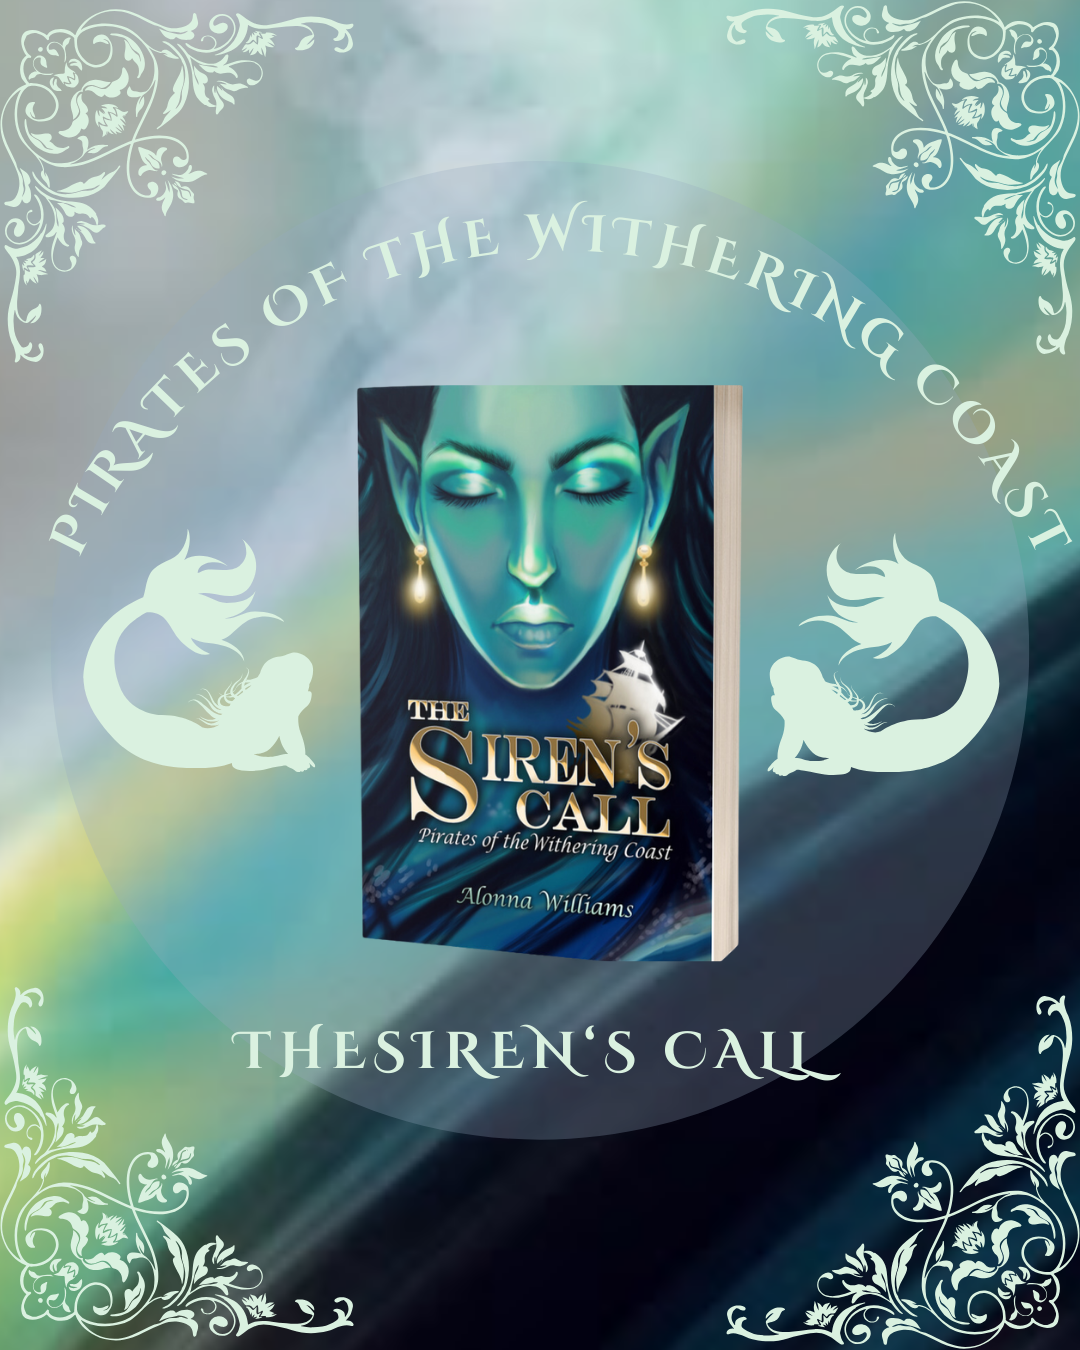 The Siren's Call (Pirates of the Withering Coast part I)